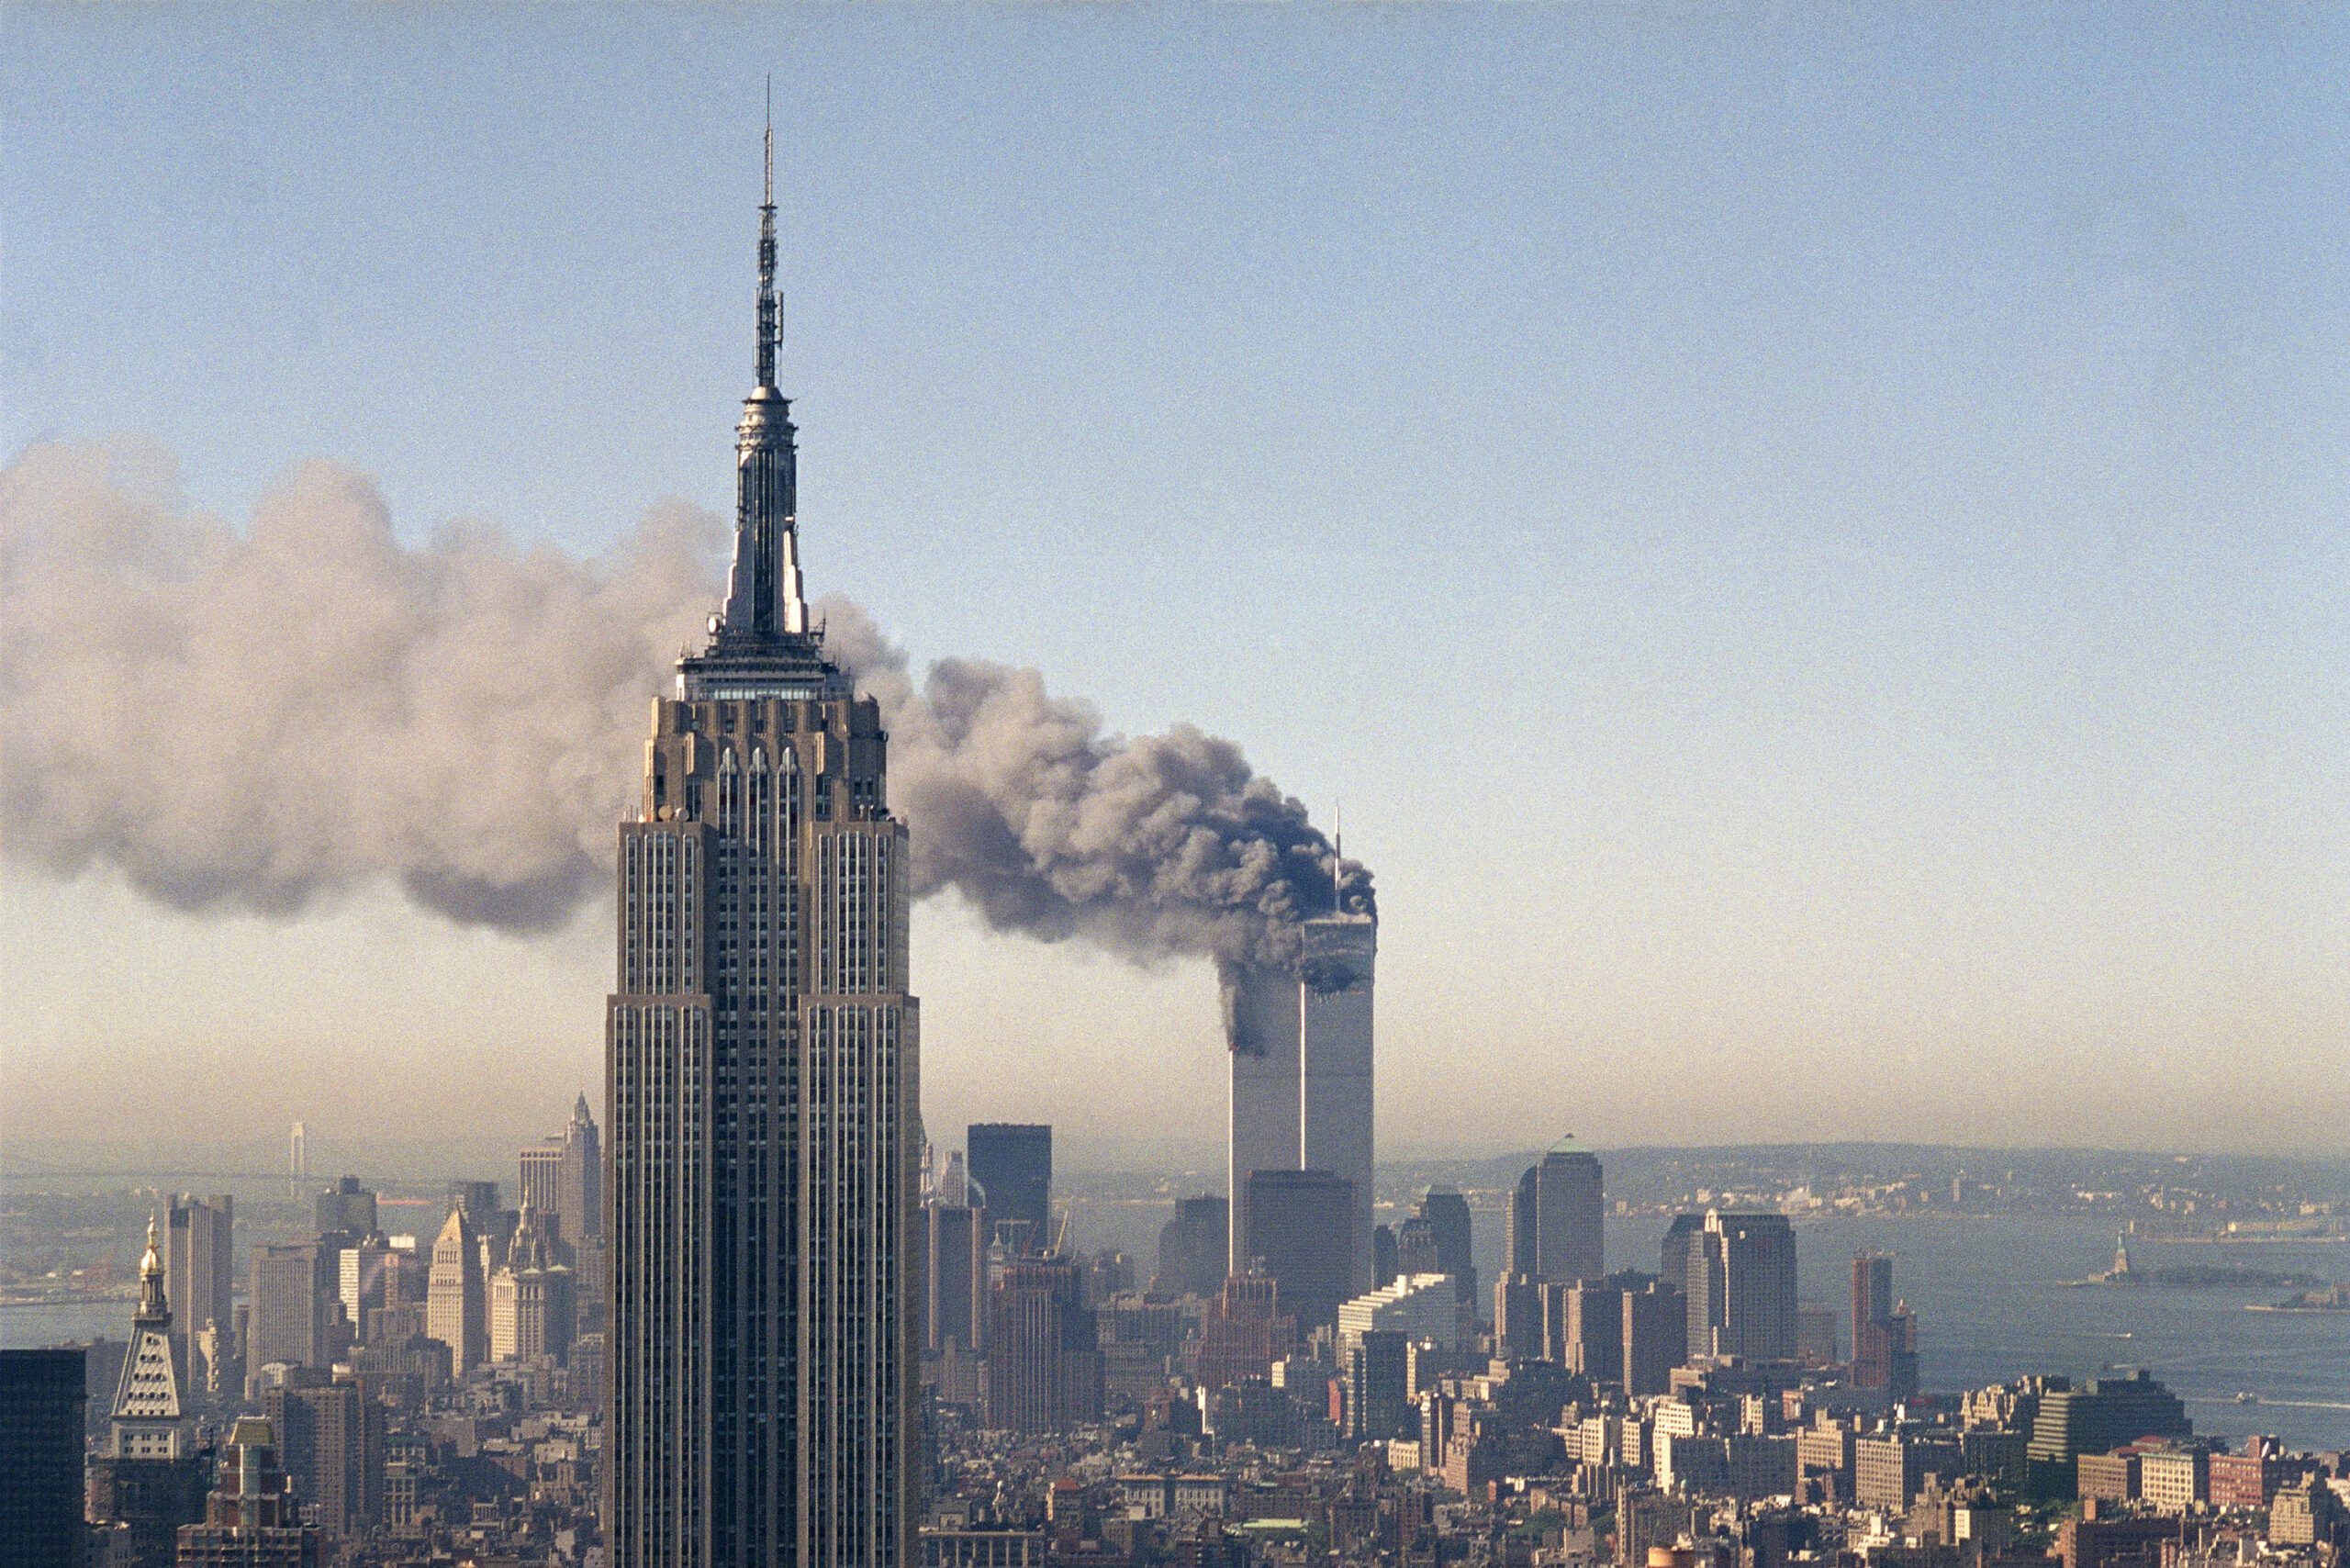 Fifth Plane Likely Involved in 9/11 Attacks According to Investigation -  Valuetainment